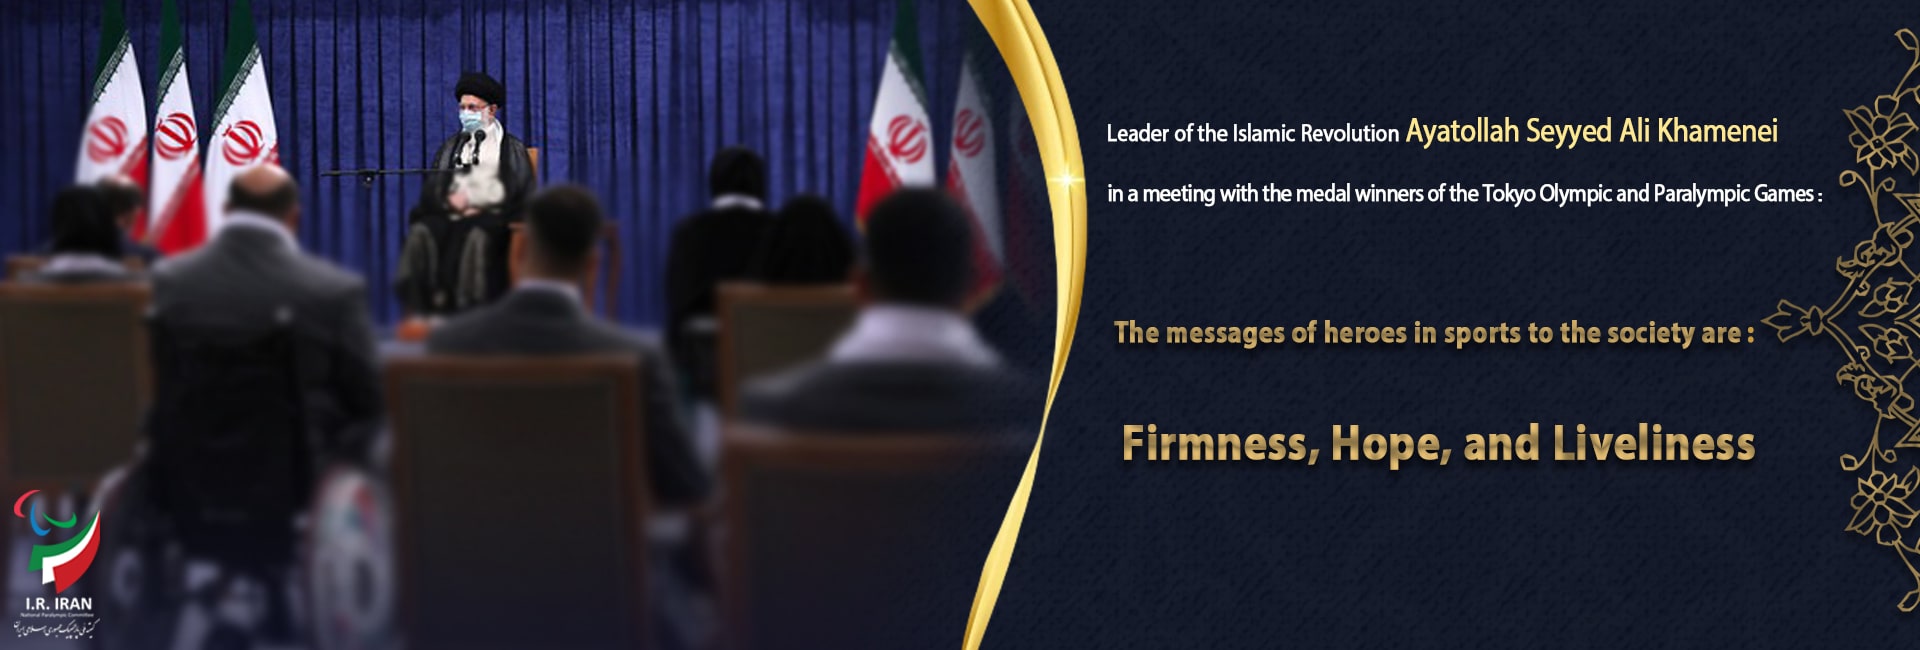 Meeting with the I.R. Iran Supreme Leader